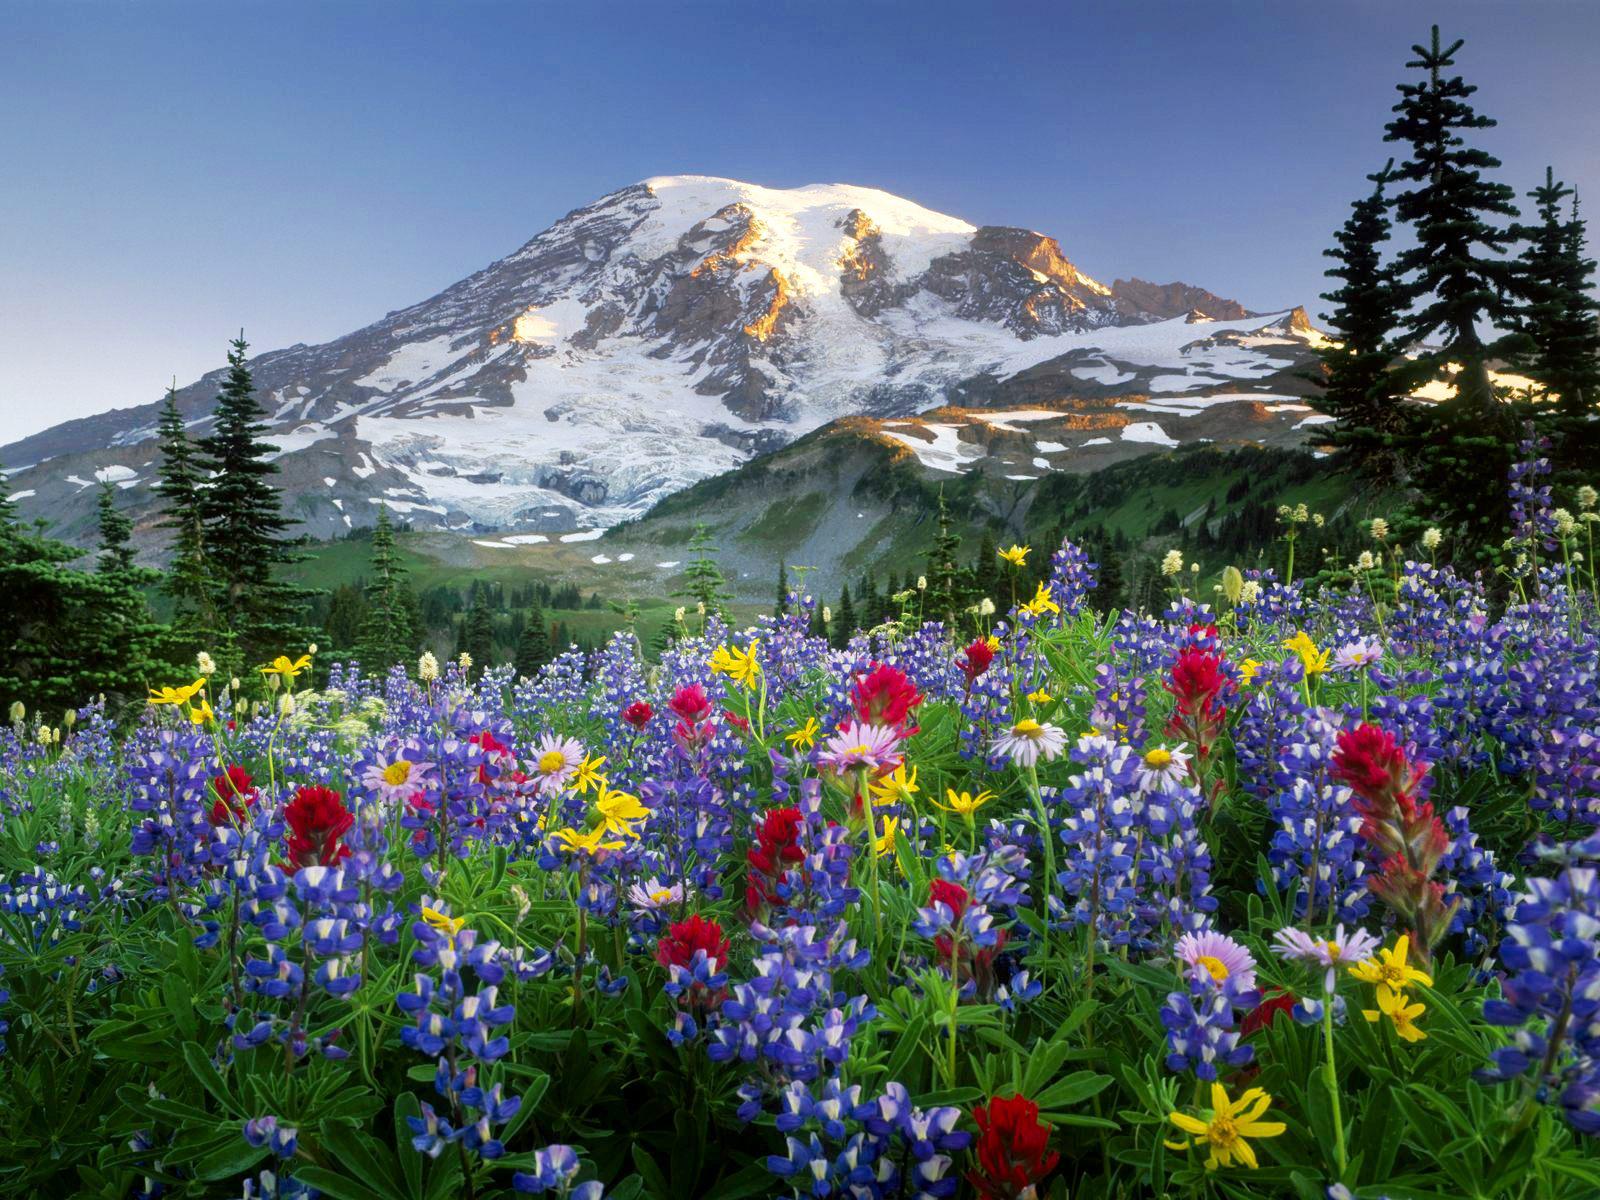 SPRING IN MOUNTAINS WALLPAPER   116576   HD Wallpapers